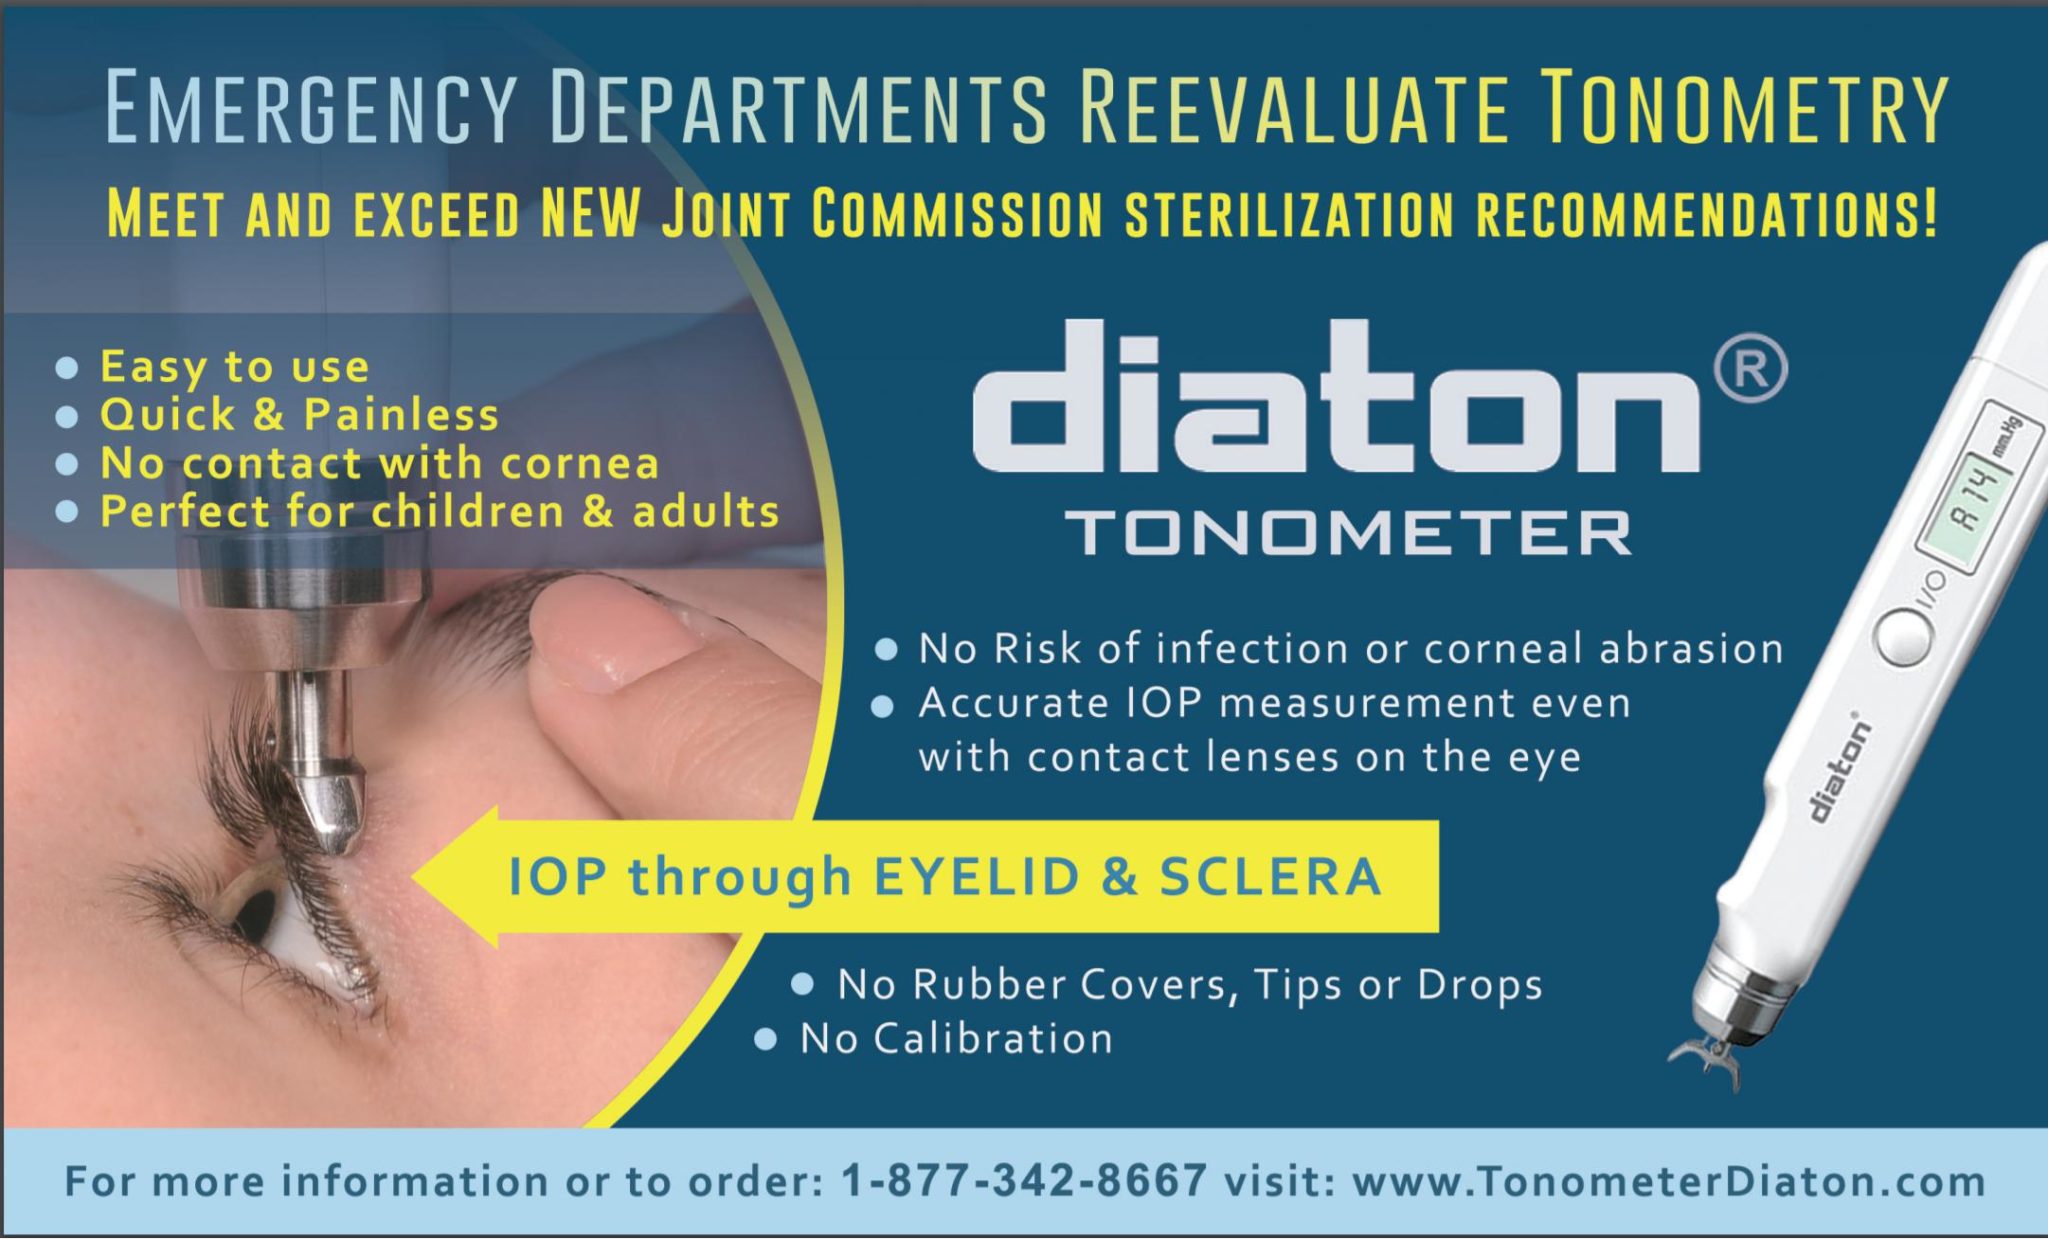 Revolutionizing Eye Care: The Advantages of Diaton Tonometer in Hospital and Emergency Medicine Settings